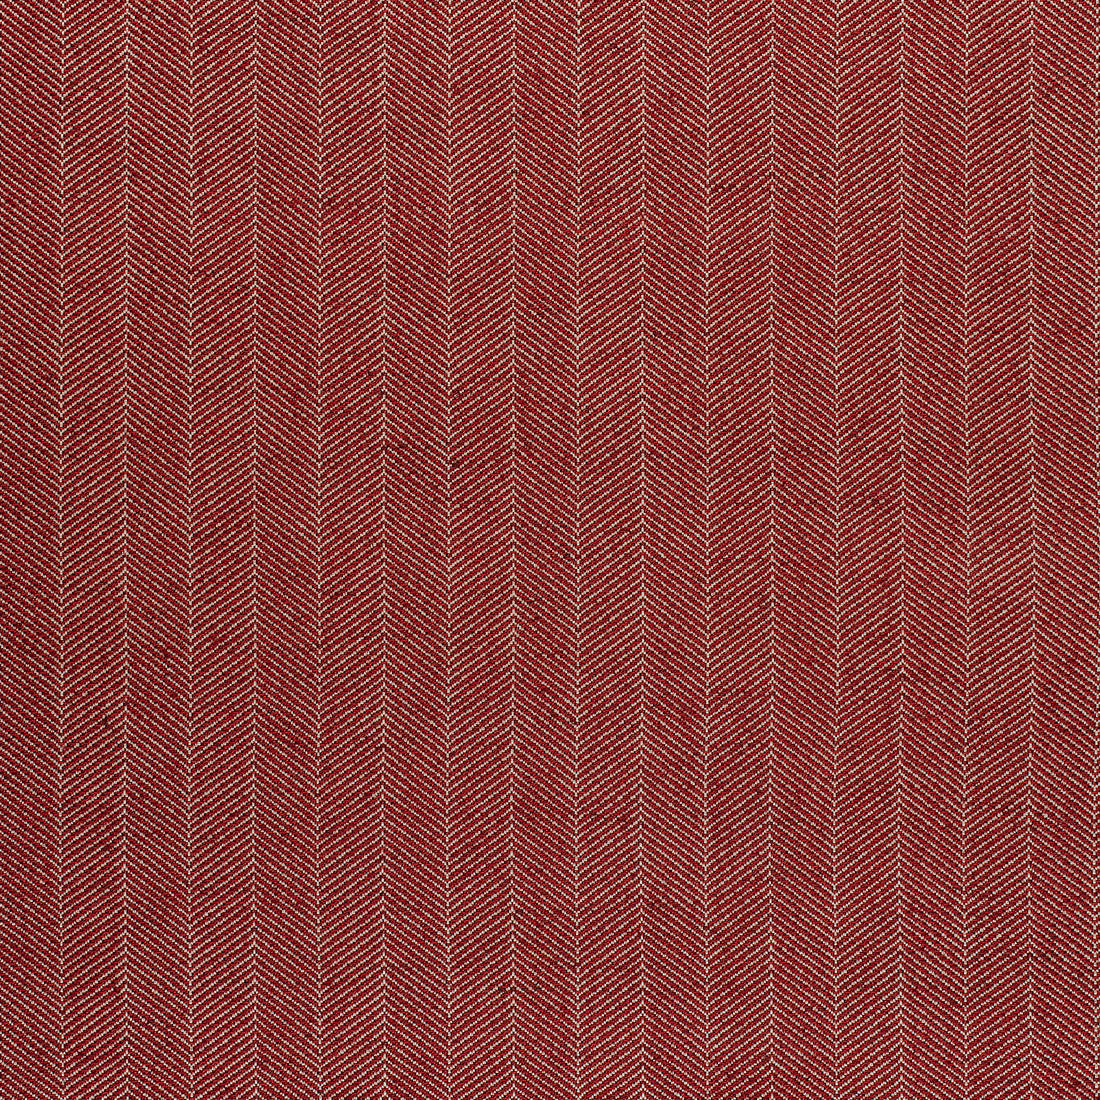 Hamilton Herringbone fabric in cardinal color - pattern number W80676 - by Thibaut in the Pinnacle collection